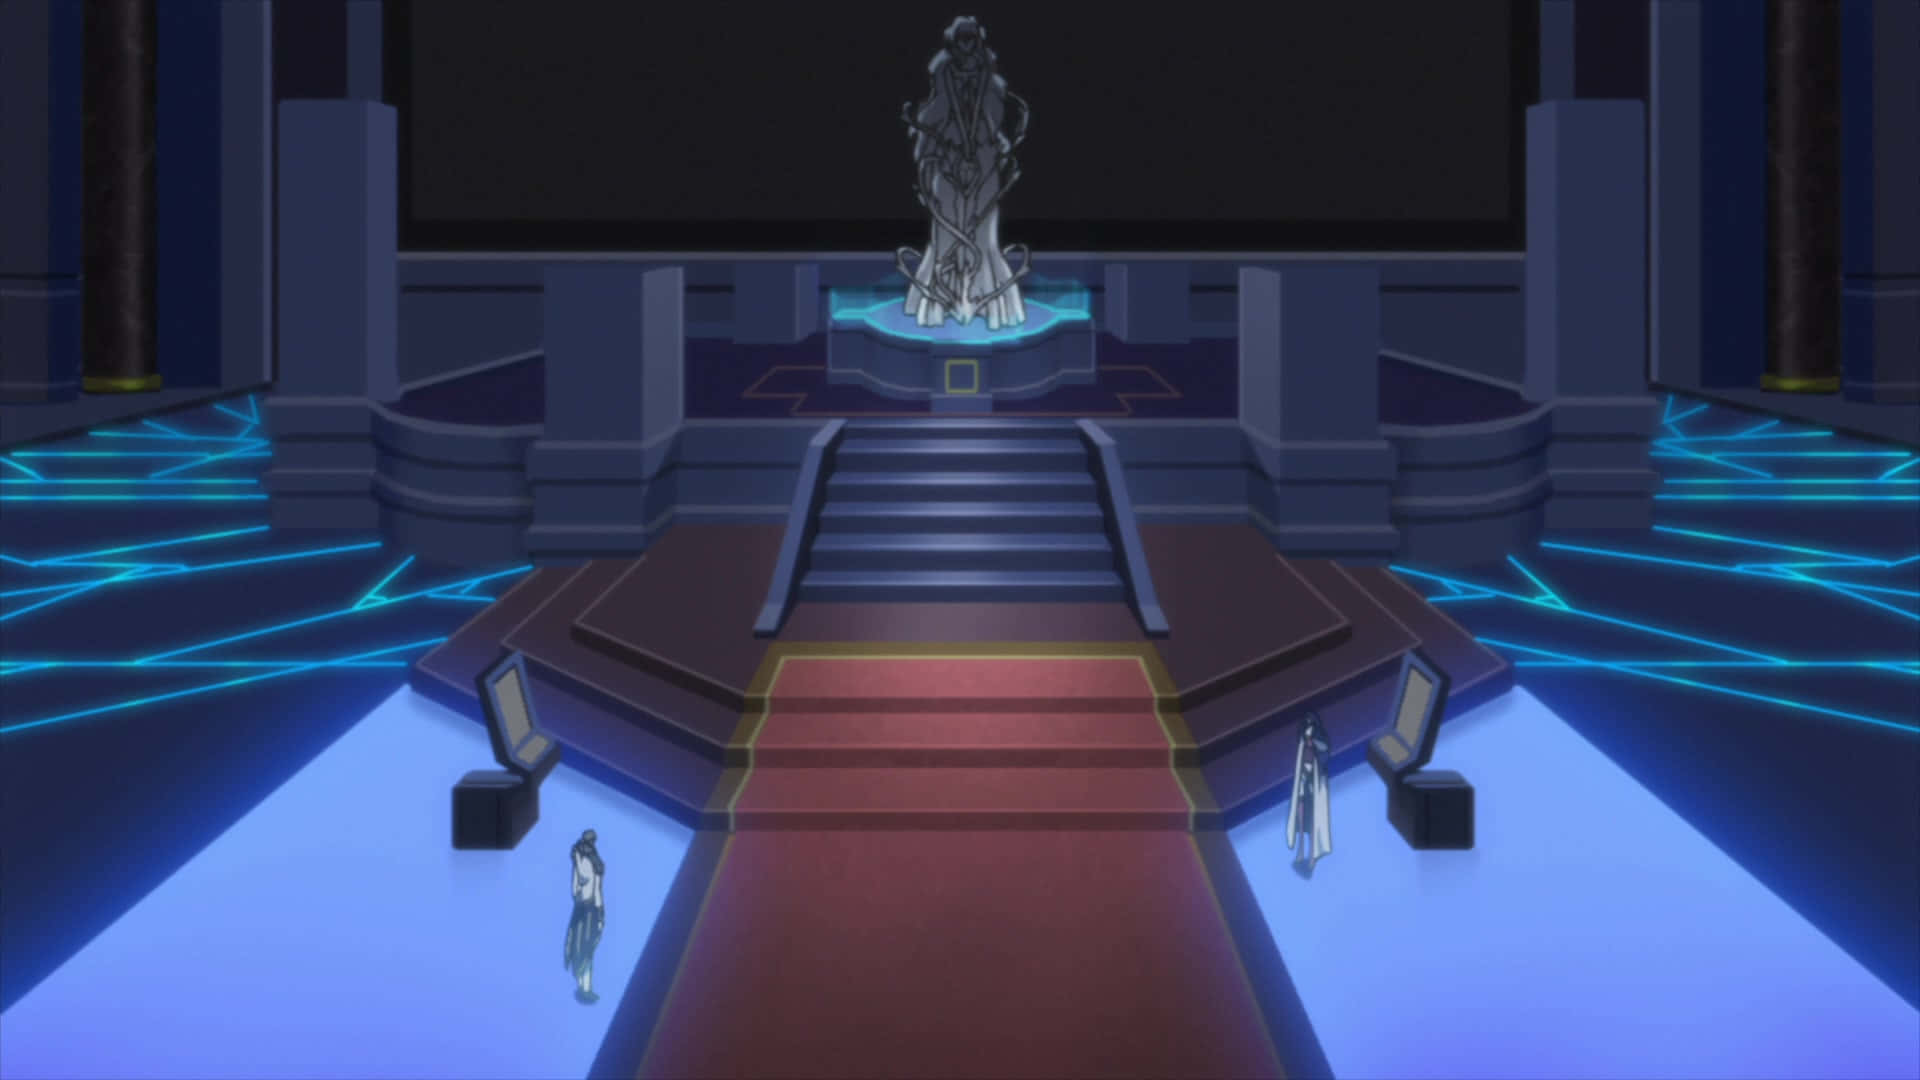 A Video Game Screenshot Of A Room With A Statue